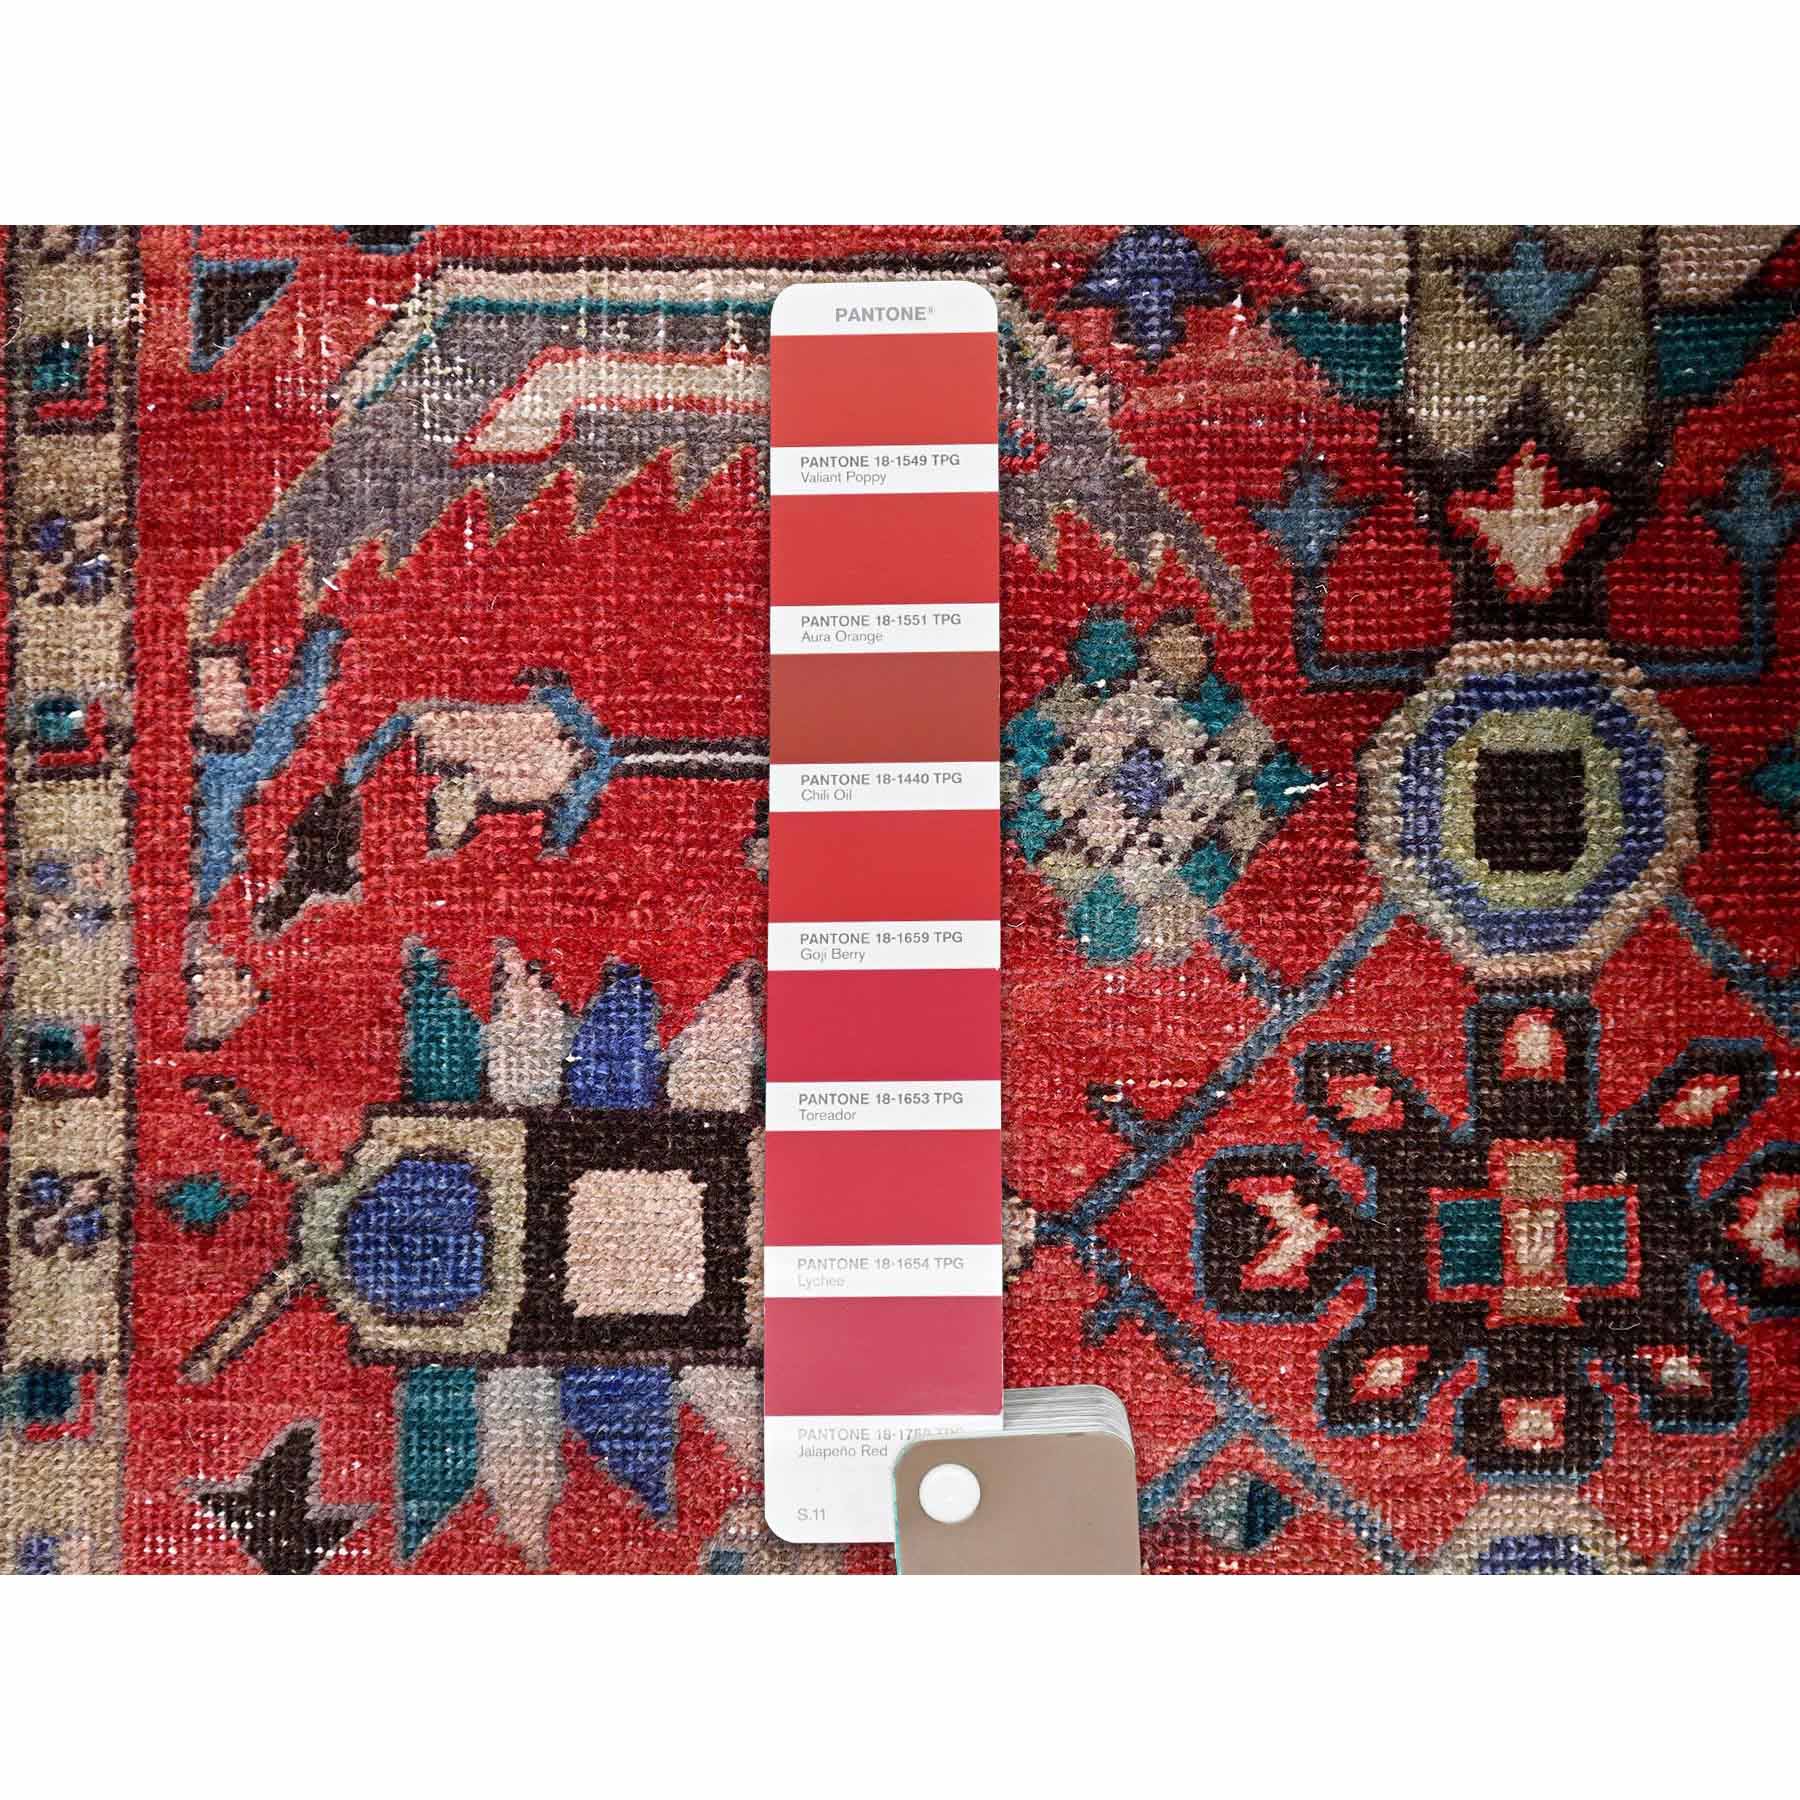 Overdyed-Vintage-Hand-Knotted-Rug-430120